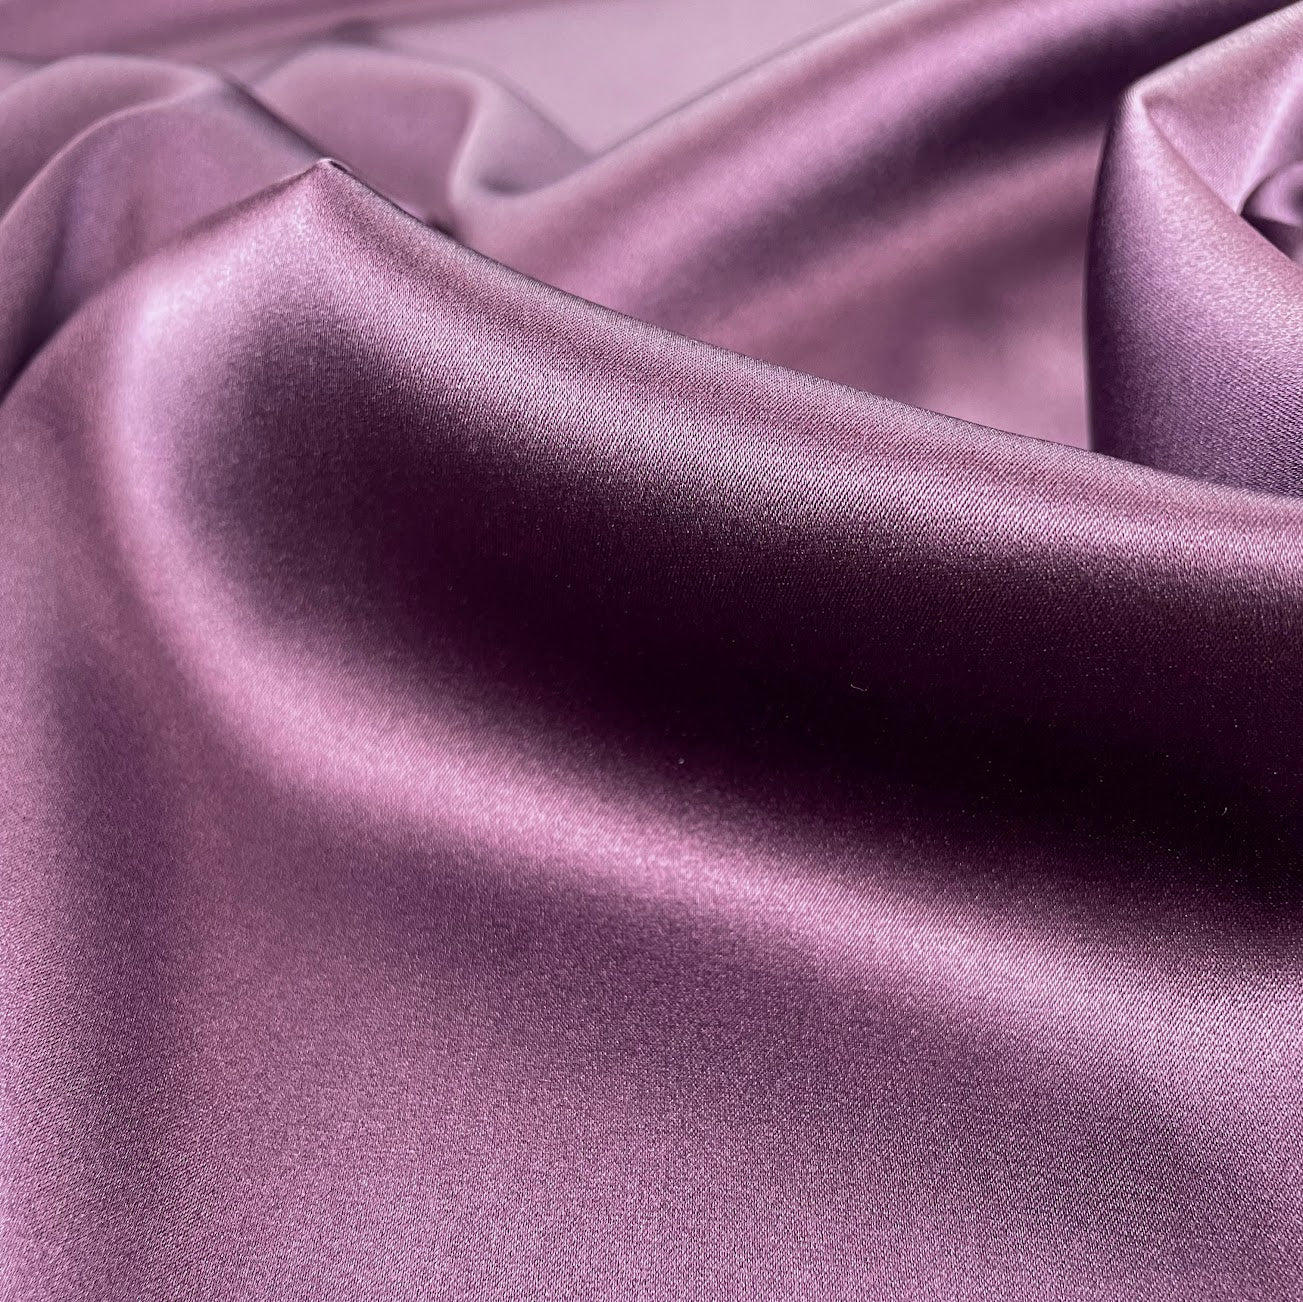 Pink 100% Pure Silk Fabric Charmeuse Fabrics by The Pre-Cut 1 Yard